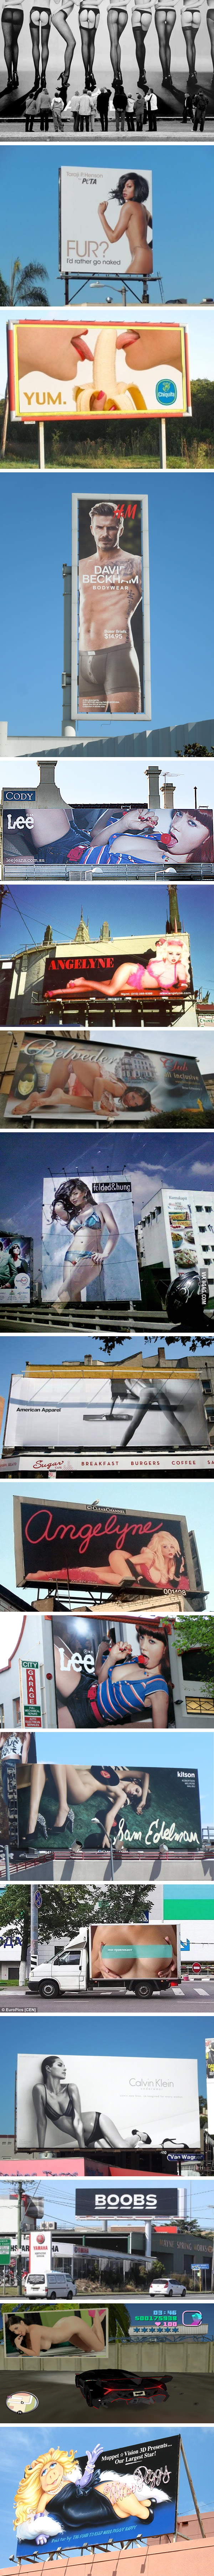 17 Sexy Billboards That Have Probably Caused Some Road Accidents